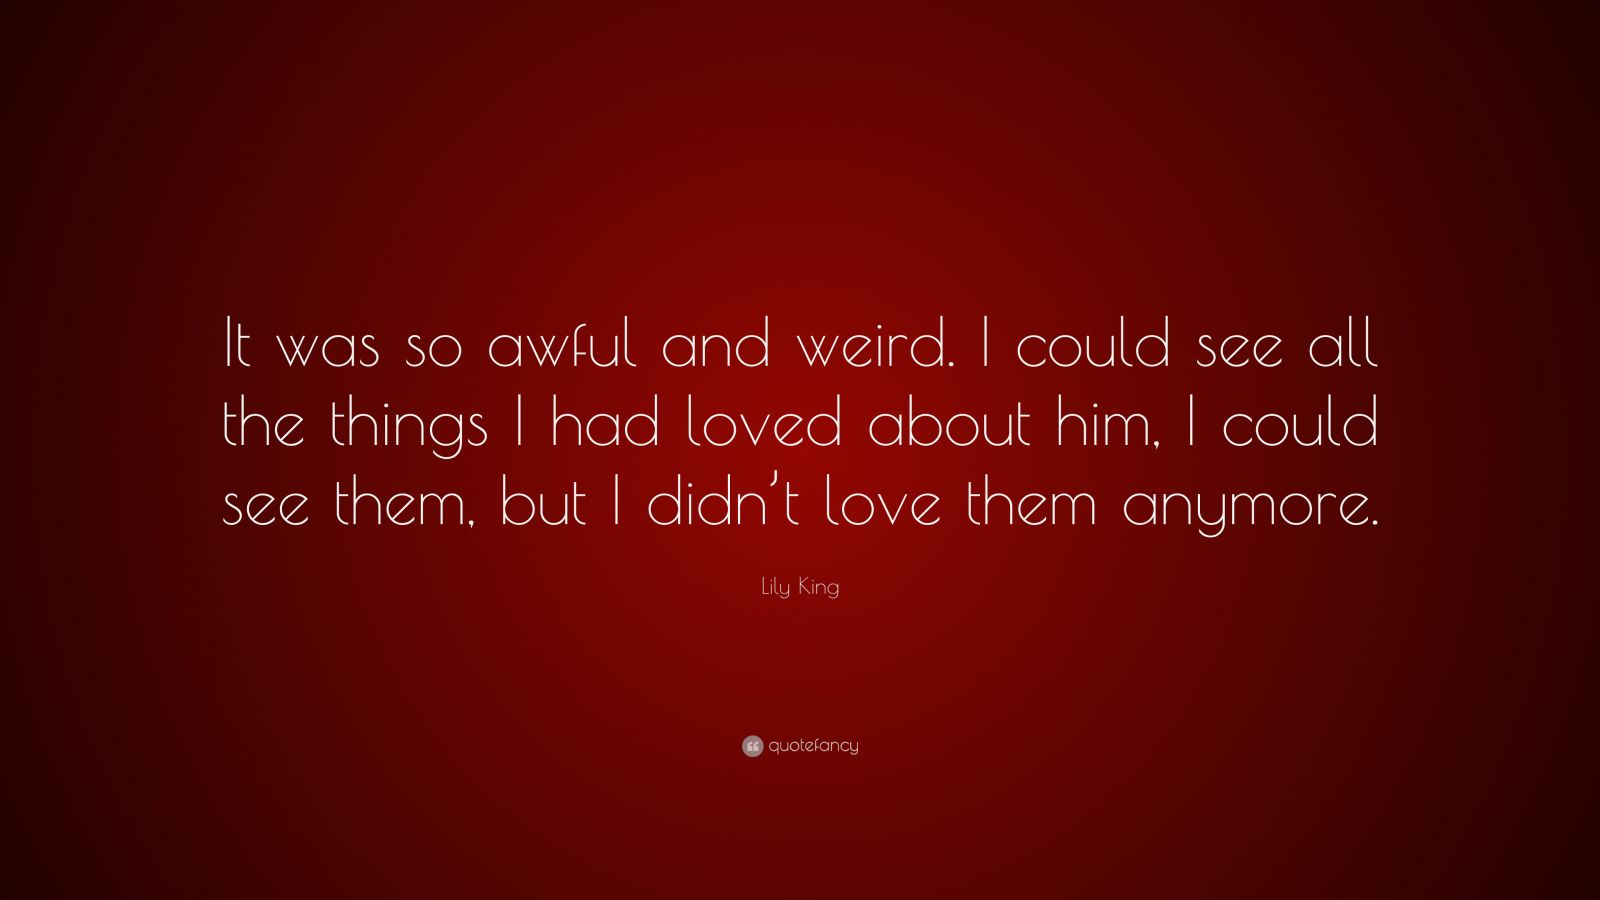 Lily King Quote: “It was so awful and weird. I could see all the things ...